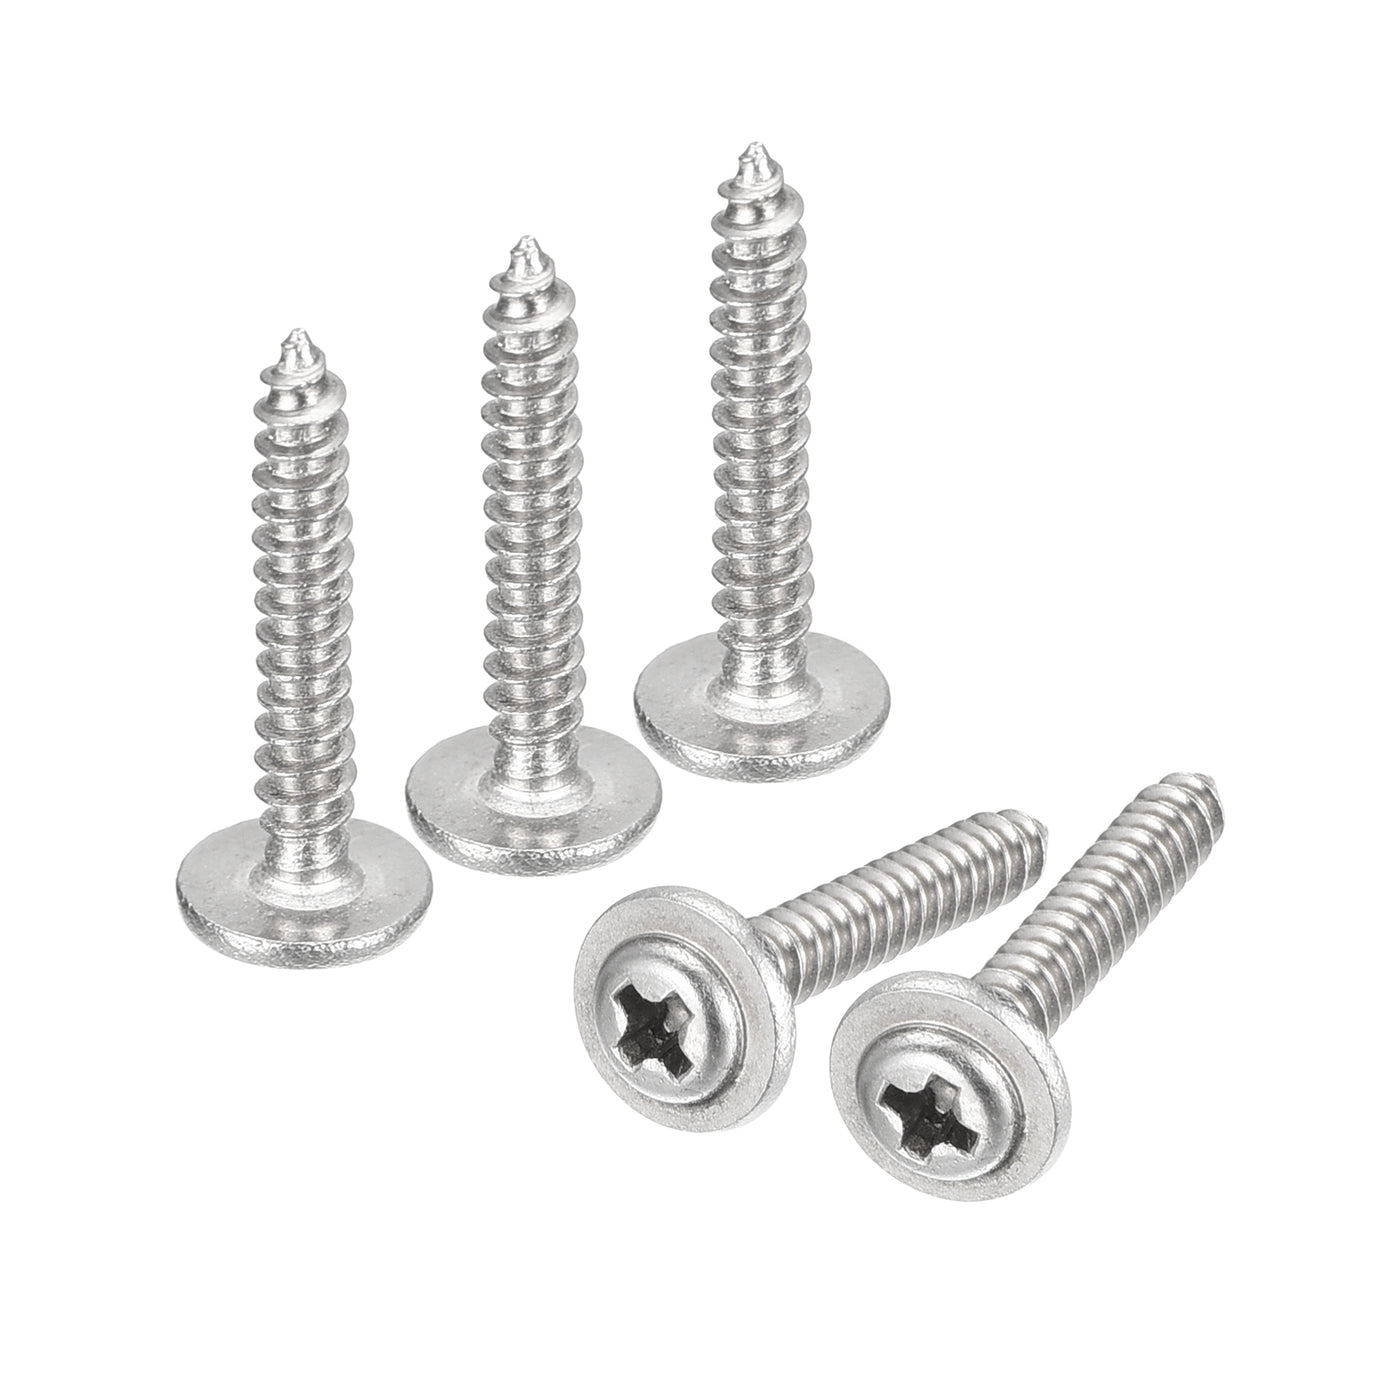 uxcell Uxcell ST2.6x14mm Phillips Pan Head Self-tapping Screw with Washer, 100pcs - 304 Stainless Steel Wood Screw Full Thread (Silver)